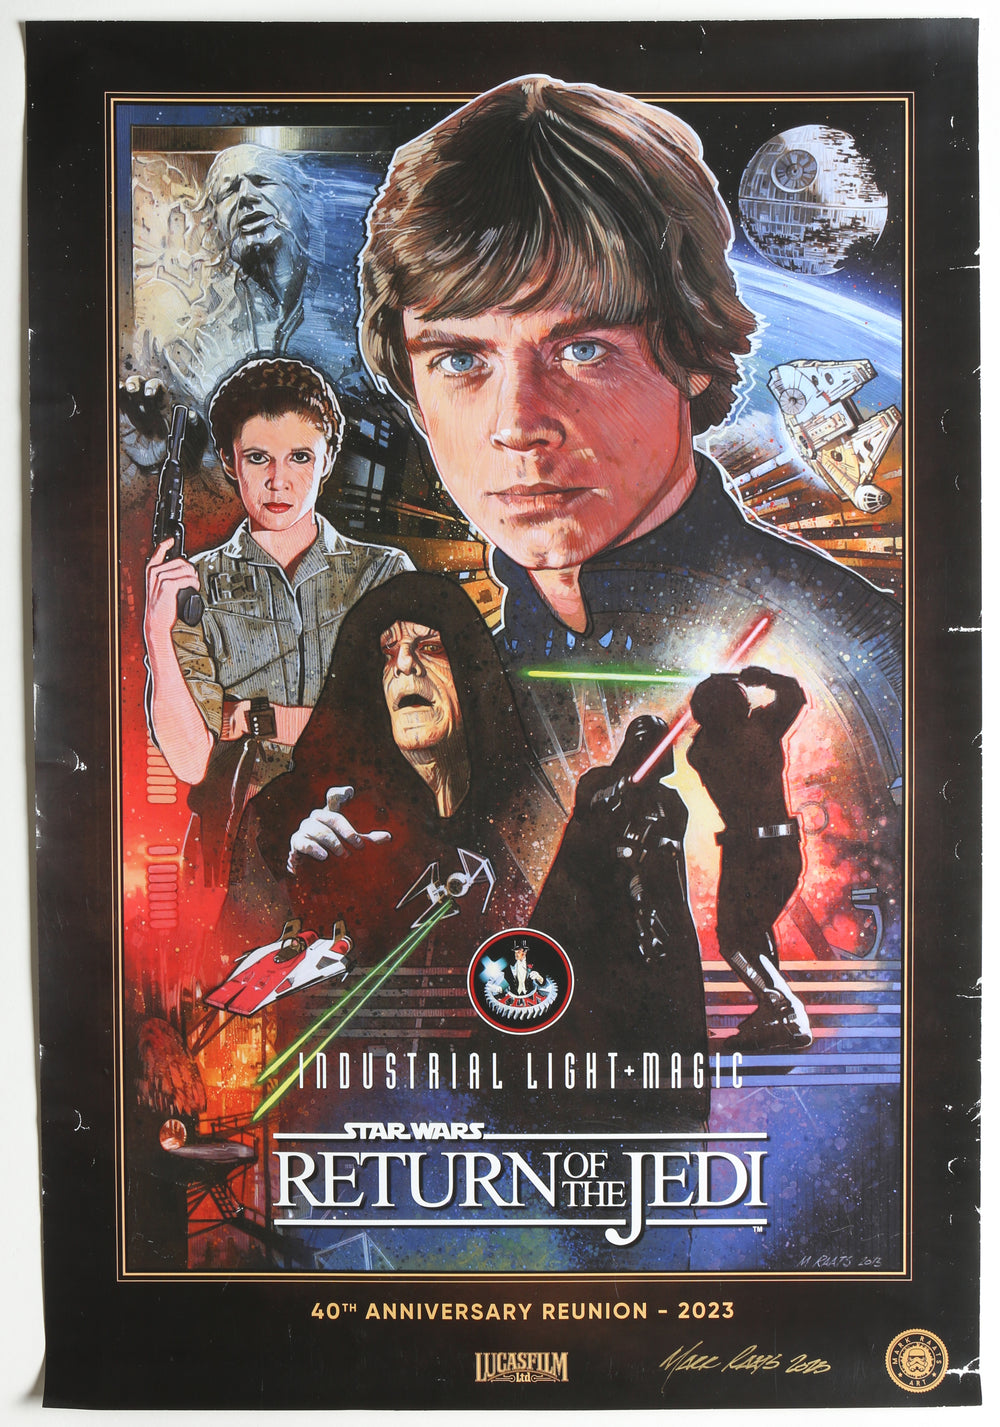 Wes Takahashi Industrial Light & Magic Collection - Star Wars: Return of the Jedi 40th Anniversary ILM Reunion Mini Poster Signed by the artist: Mark Raats